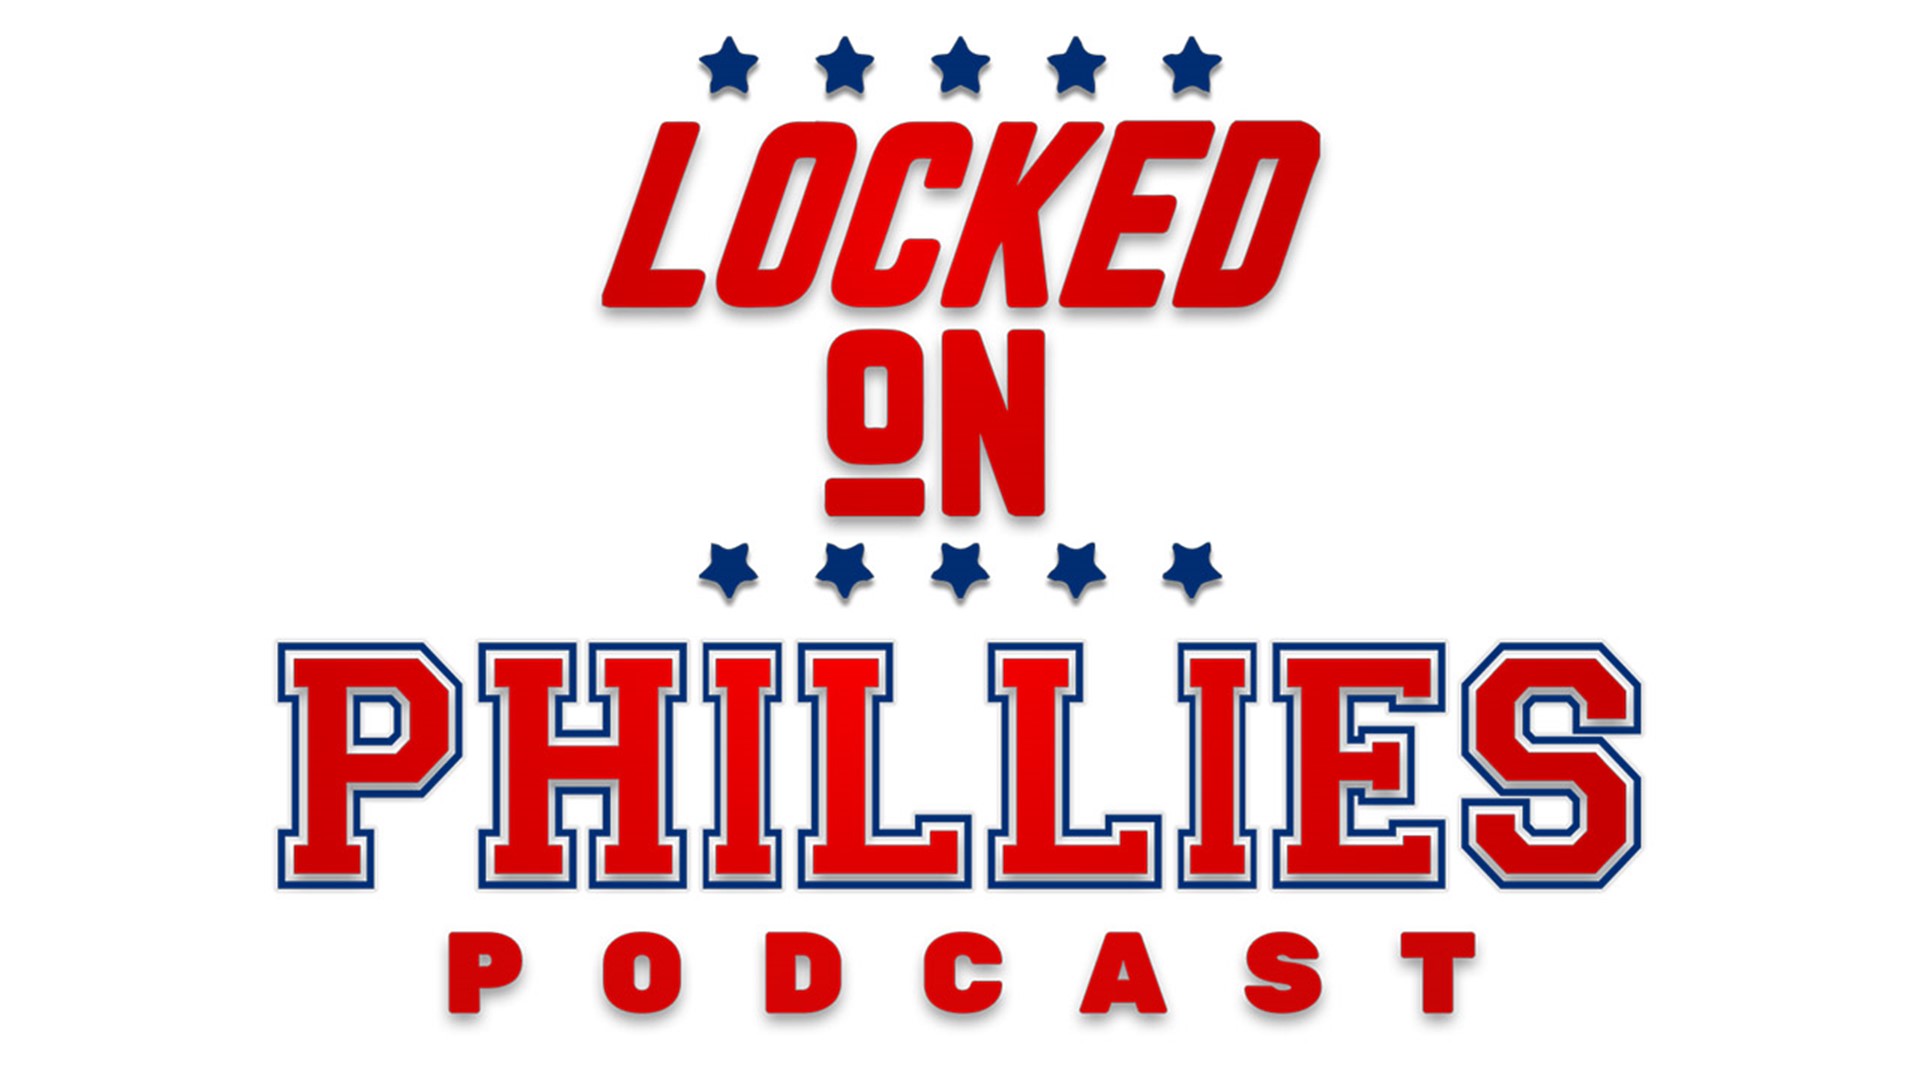 In today's episode, Connor reacts to the Philadelphia Phillies' ending of their 11 year long playoff drought by beating the Houston Astros 3-0.